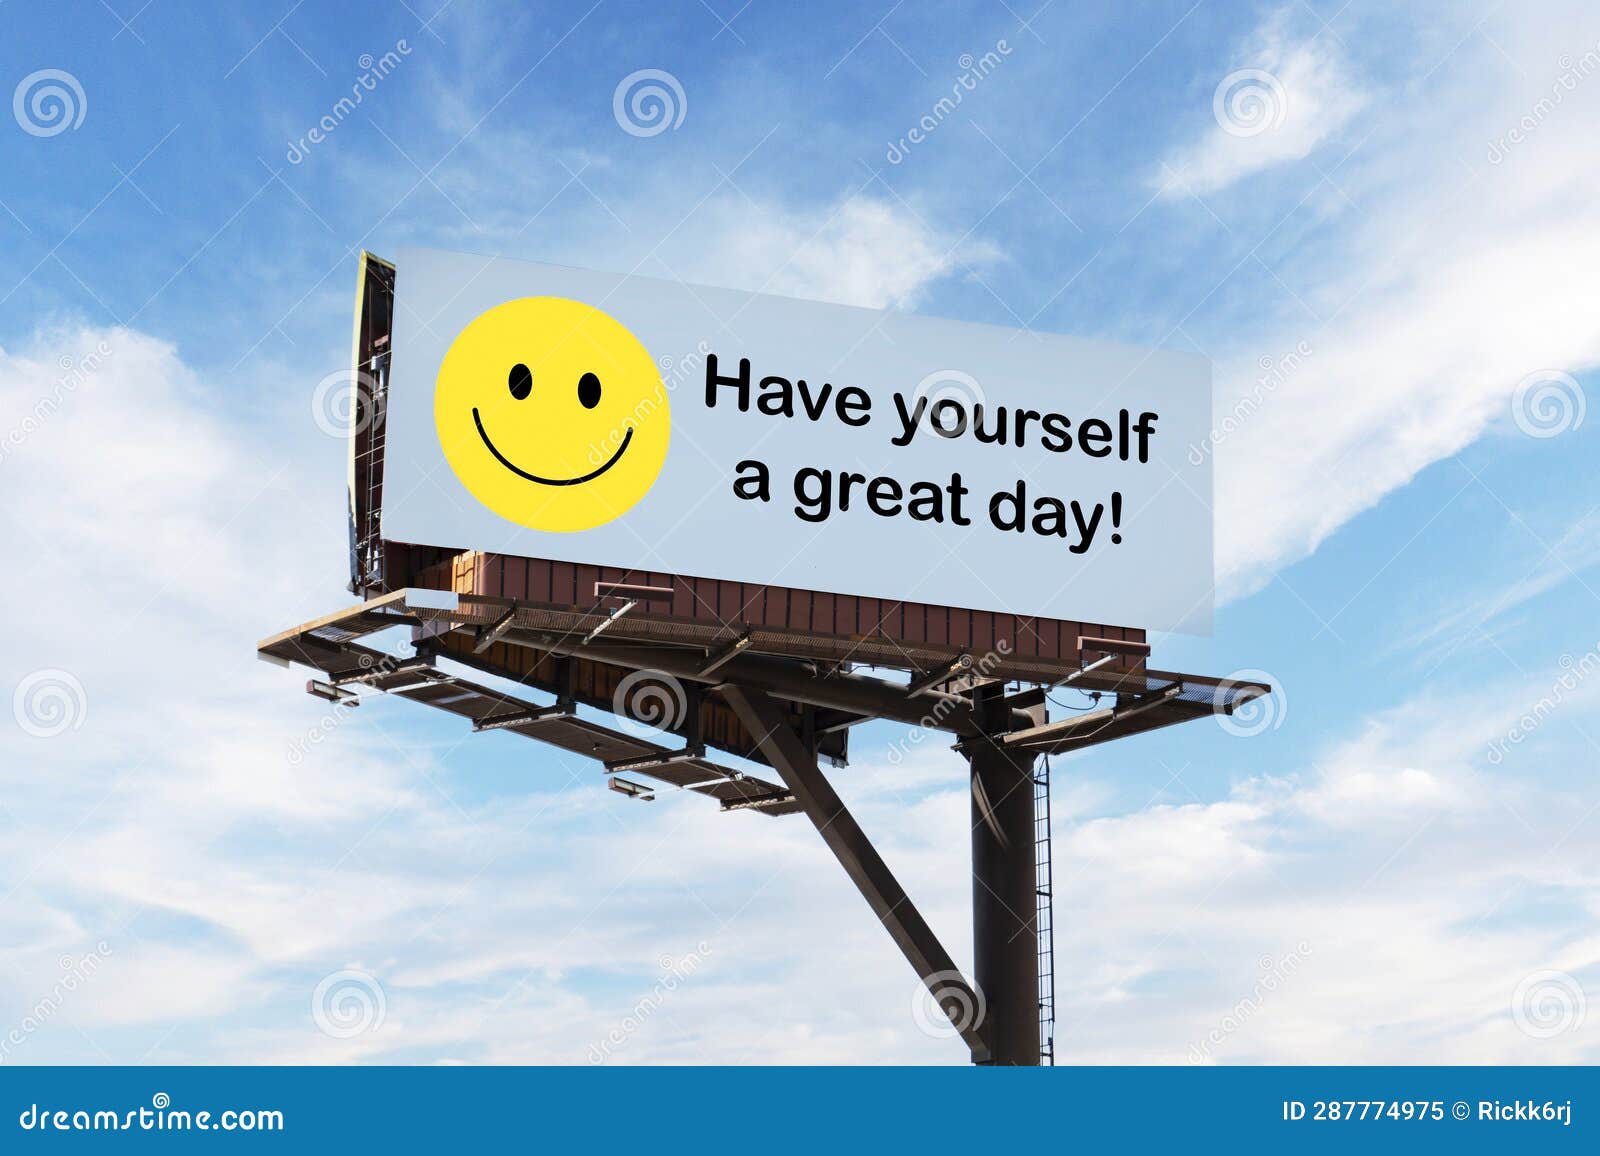 roadside billboard with admonition to have great day